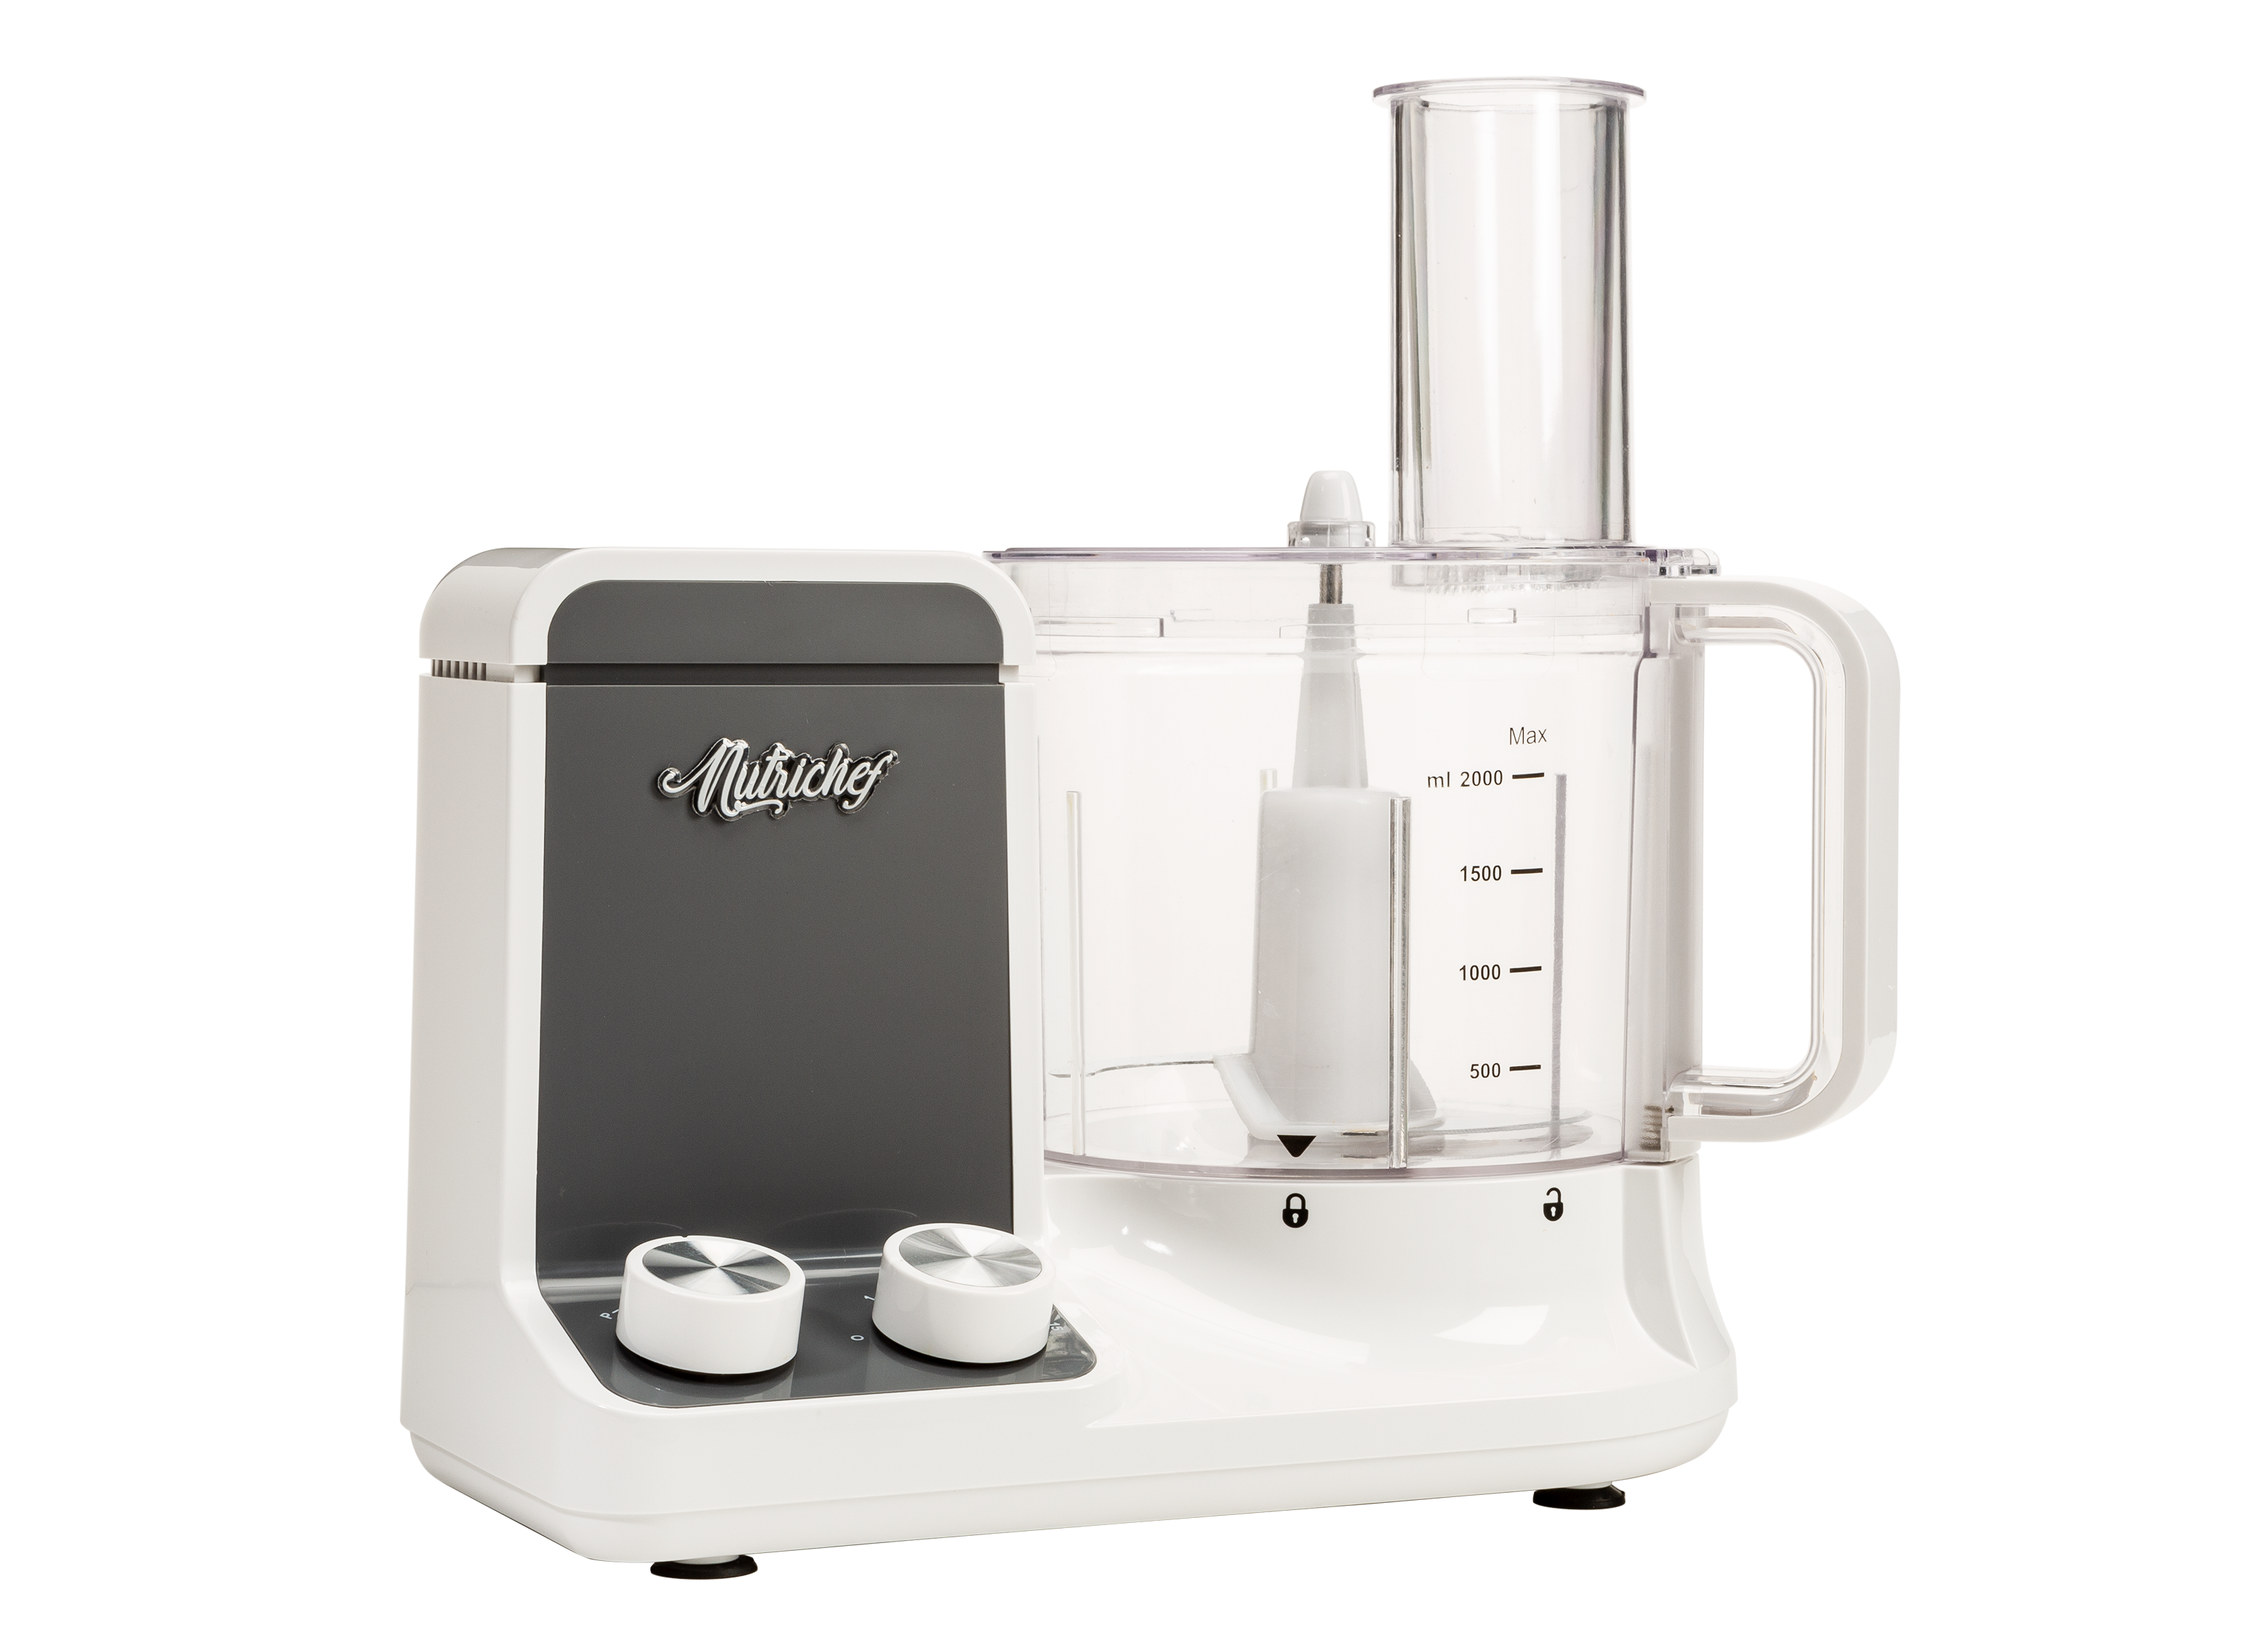 https://crdms.images.consumerreports.org/prod/products/cr/models/401568-food-processors-nutrichef-ncfp8-multipurpose-12-cup-multifunction-10014786.png